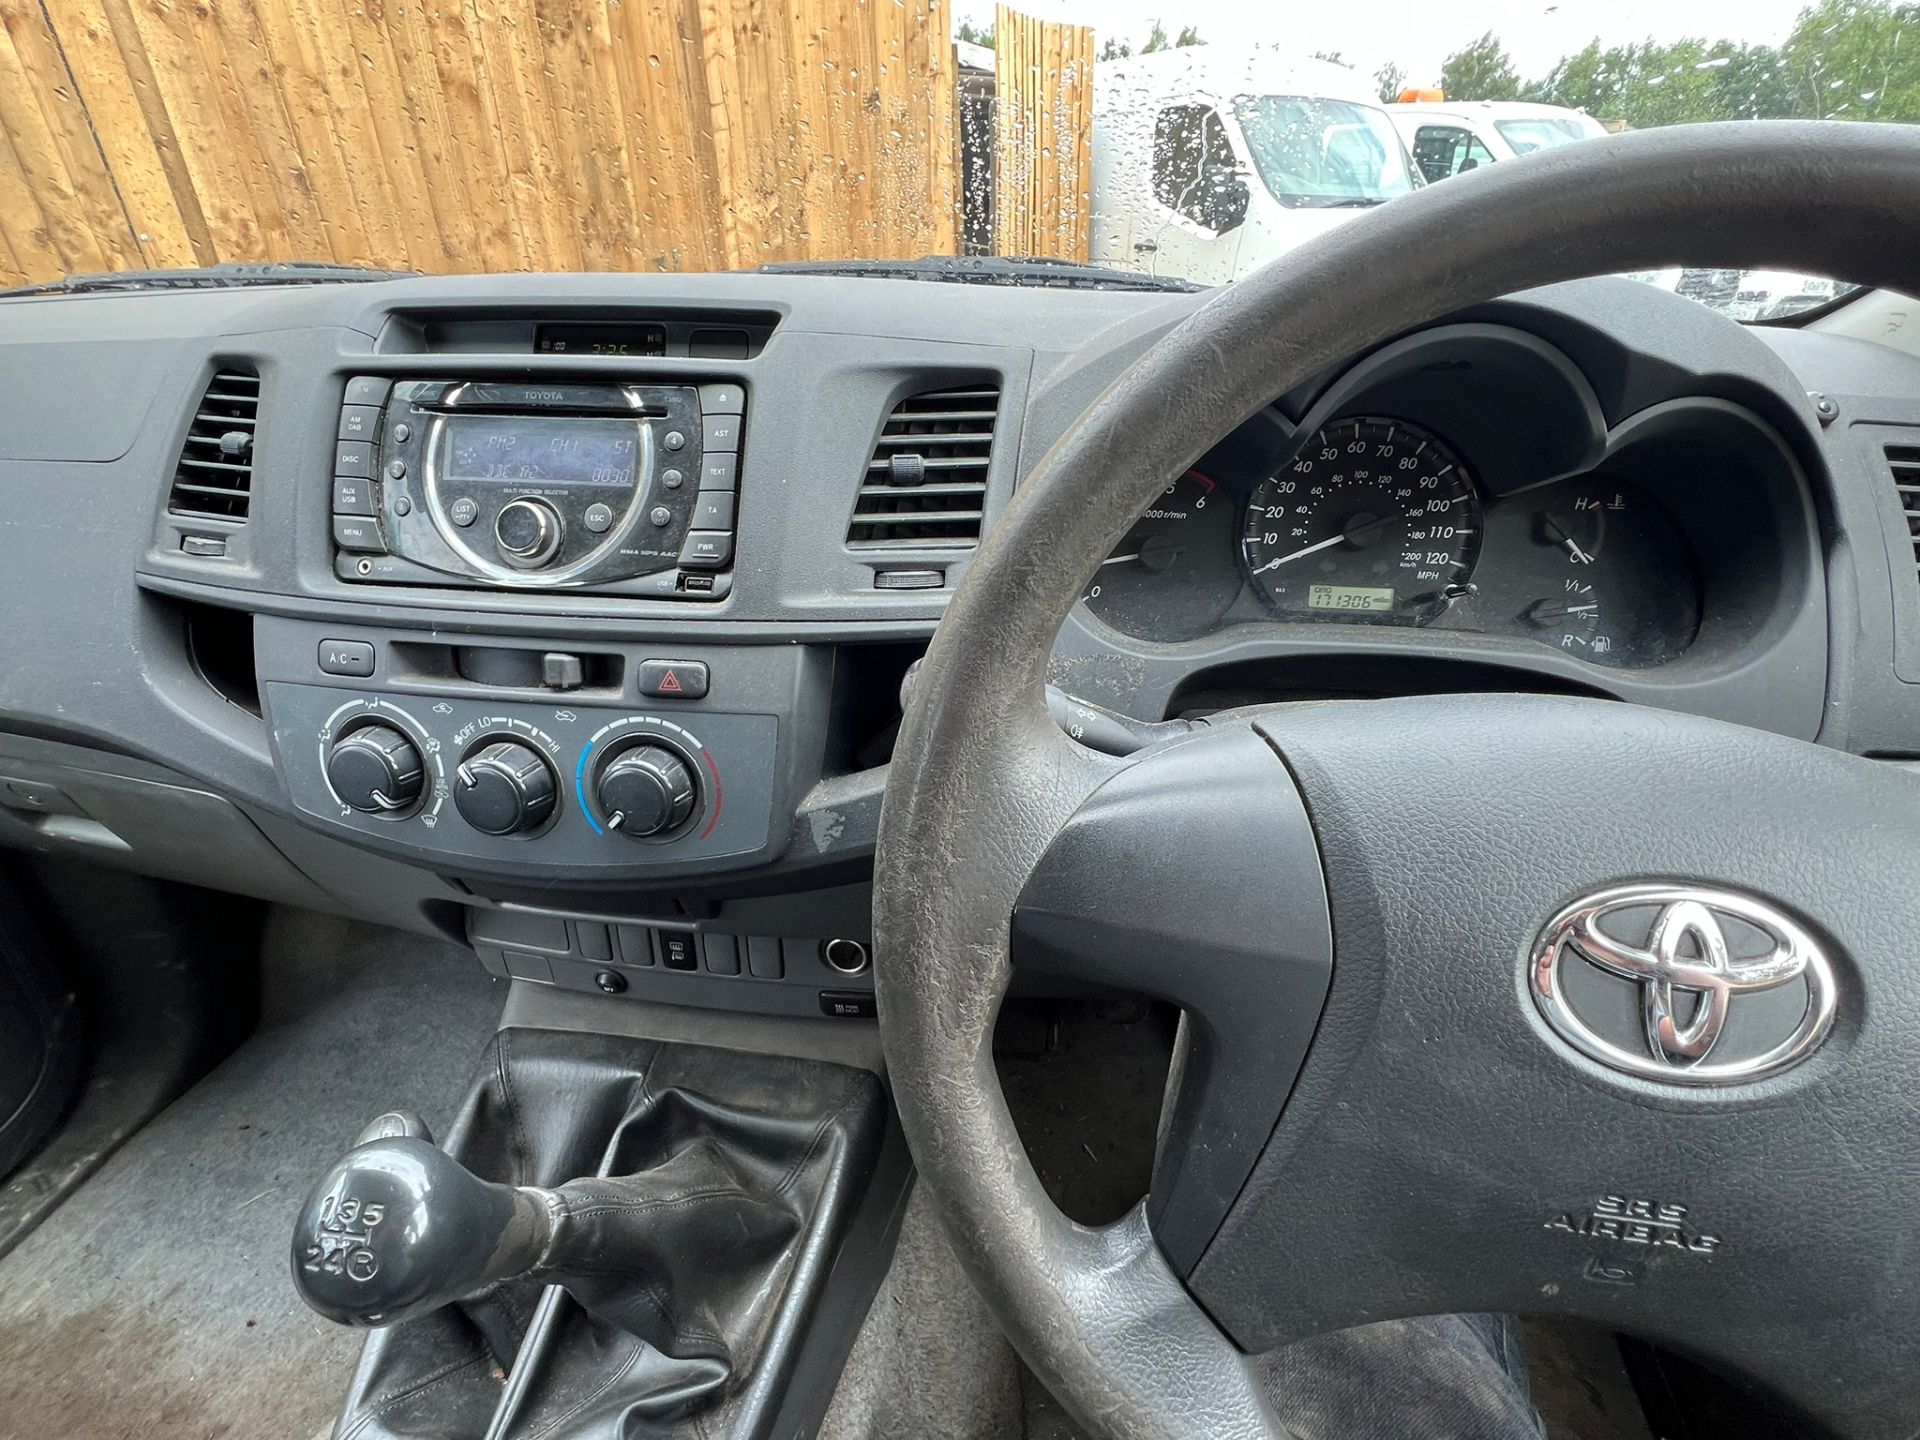 2012 TOYOTA HILUX HL2 PICK UP - DAB RADIO - A/C - ELECTRIC MIRRORS. - Image 8 of 14